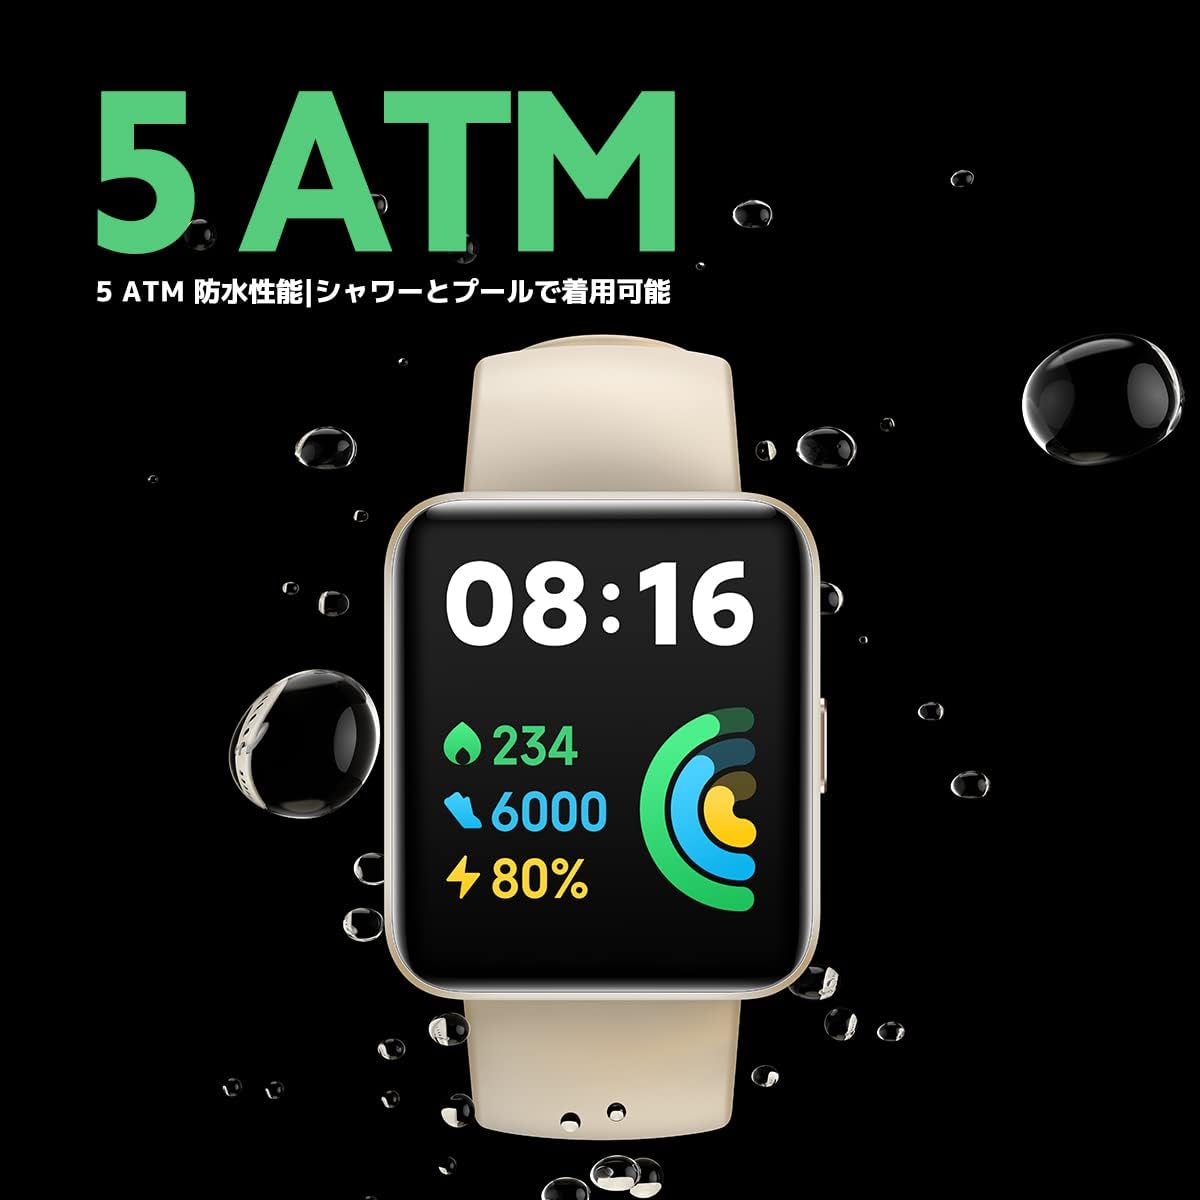 Redmi Smart Watch 2 Lite Black by Xiaomi - 1.55’’ Touch Screen, 5ATM Water Resistant, 10 Days Battery, GPS, 100+ Sports Mode, Steps, Sleep, Heart Rate Monitor, Fitness Activity Tracker [Official UK]